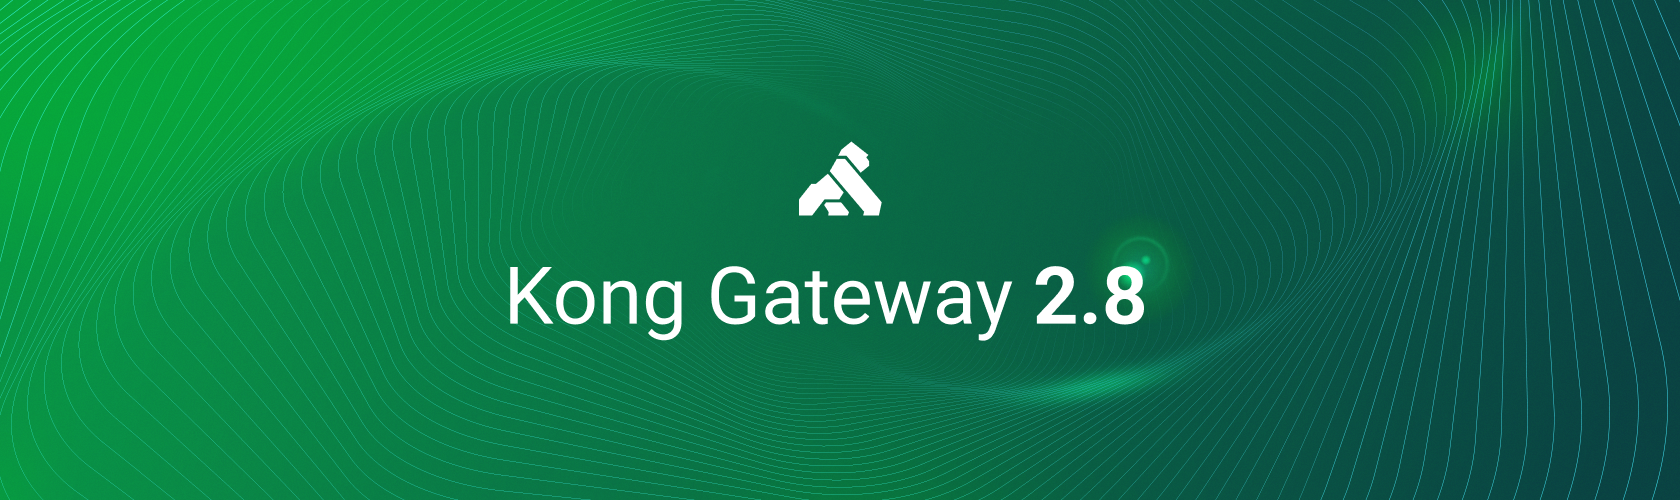 Kong Gateway 2.8: Increase Security and Simplify API Management